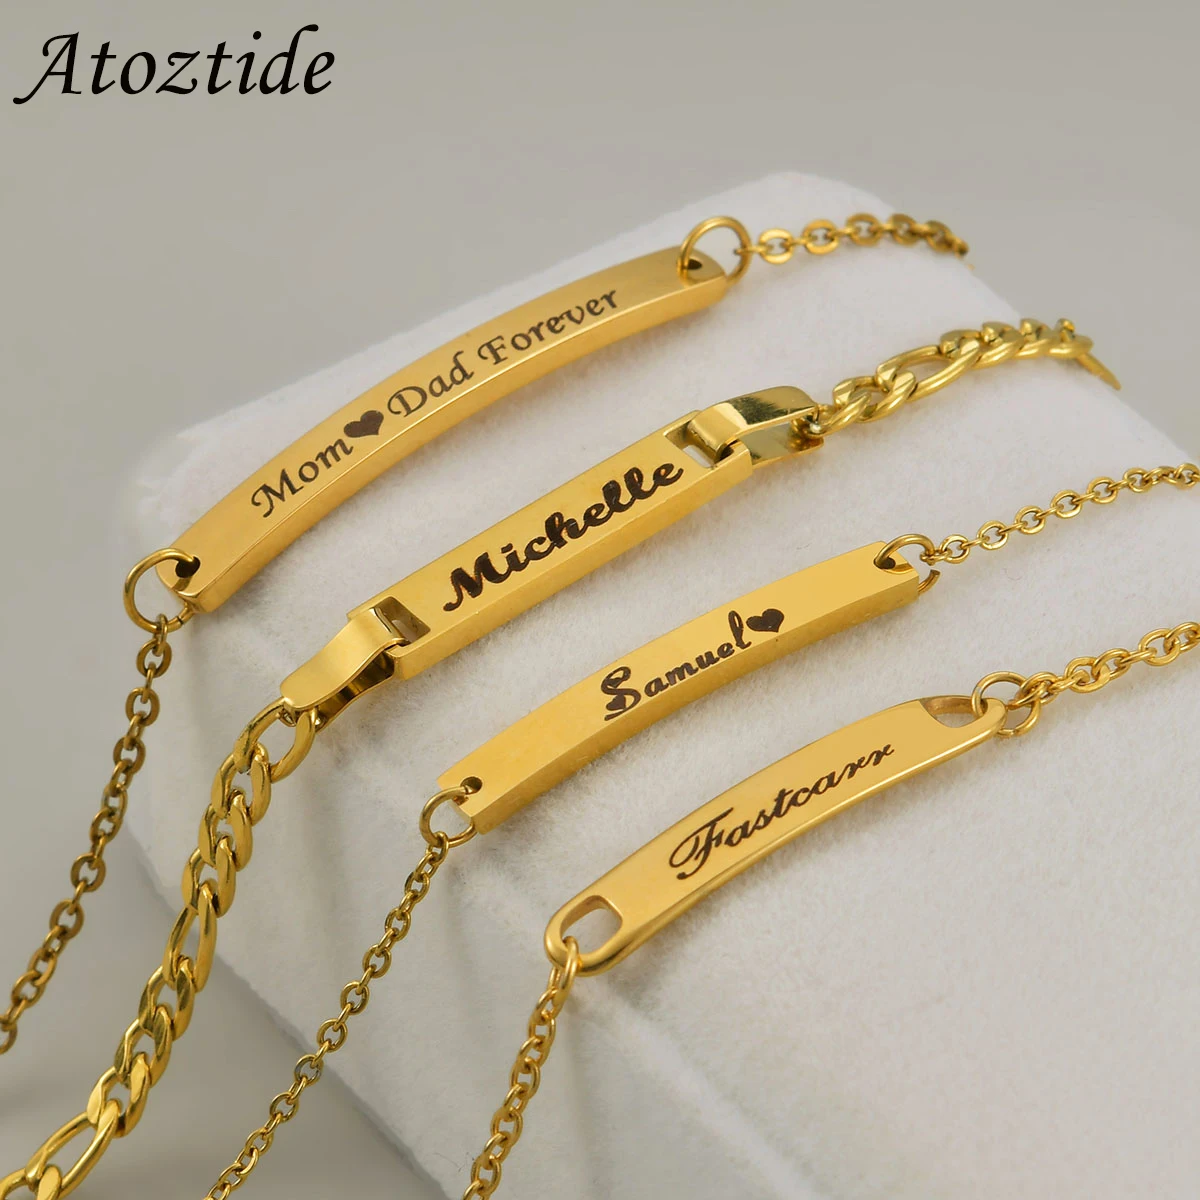 Atoztide Custom Baby Name Bar Nameplate Bracelet For Stainless Steel Women Kids Adjustable Link Chain Personalized Jewelry Gift видеоняня alcatel baby link 830